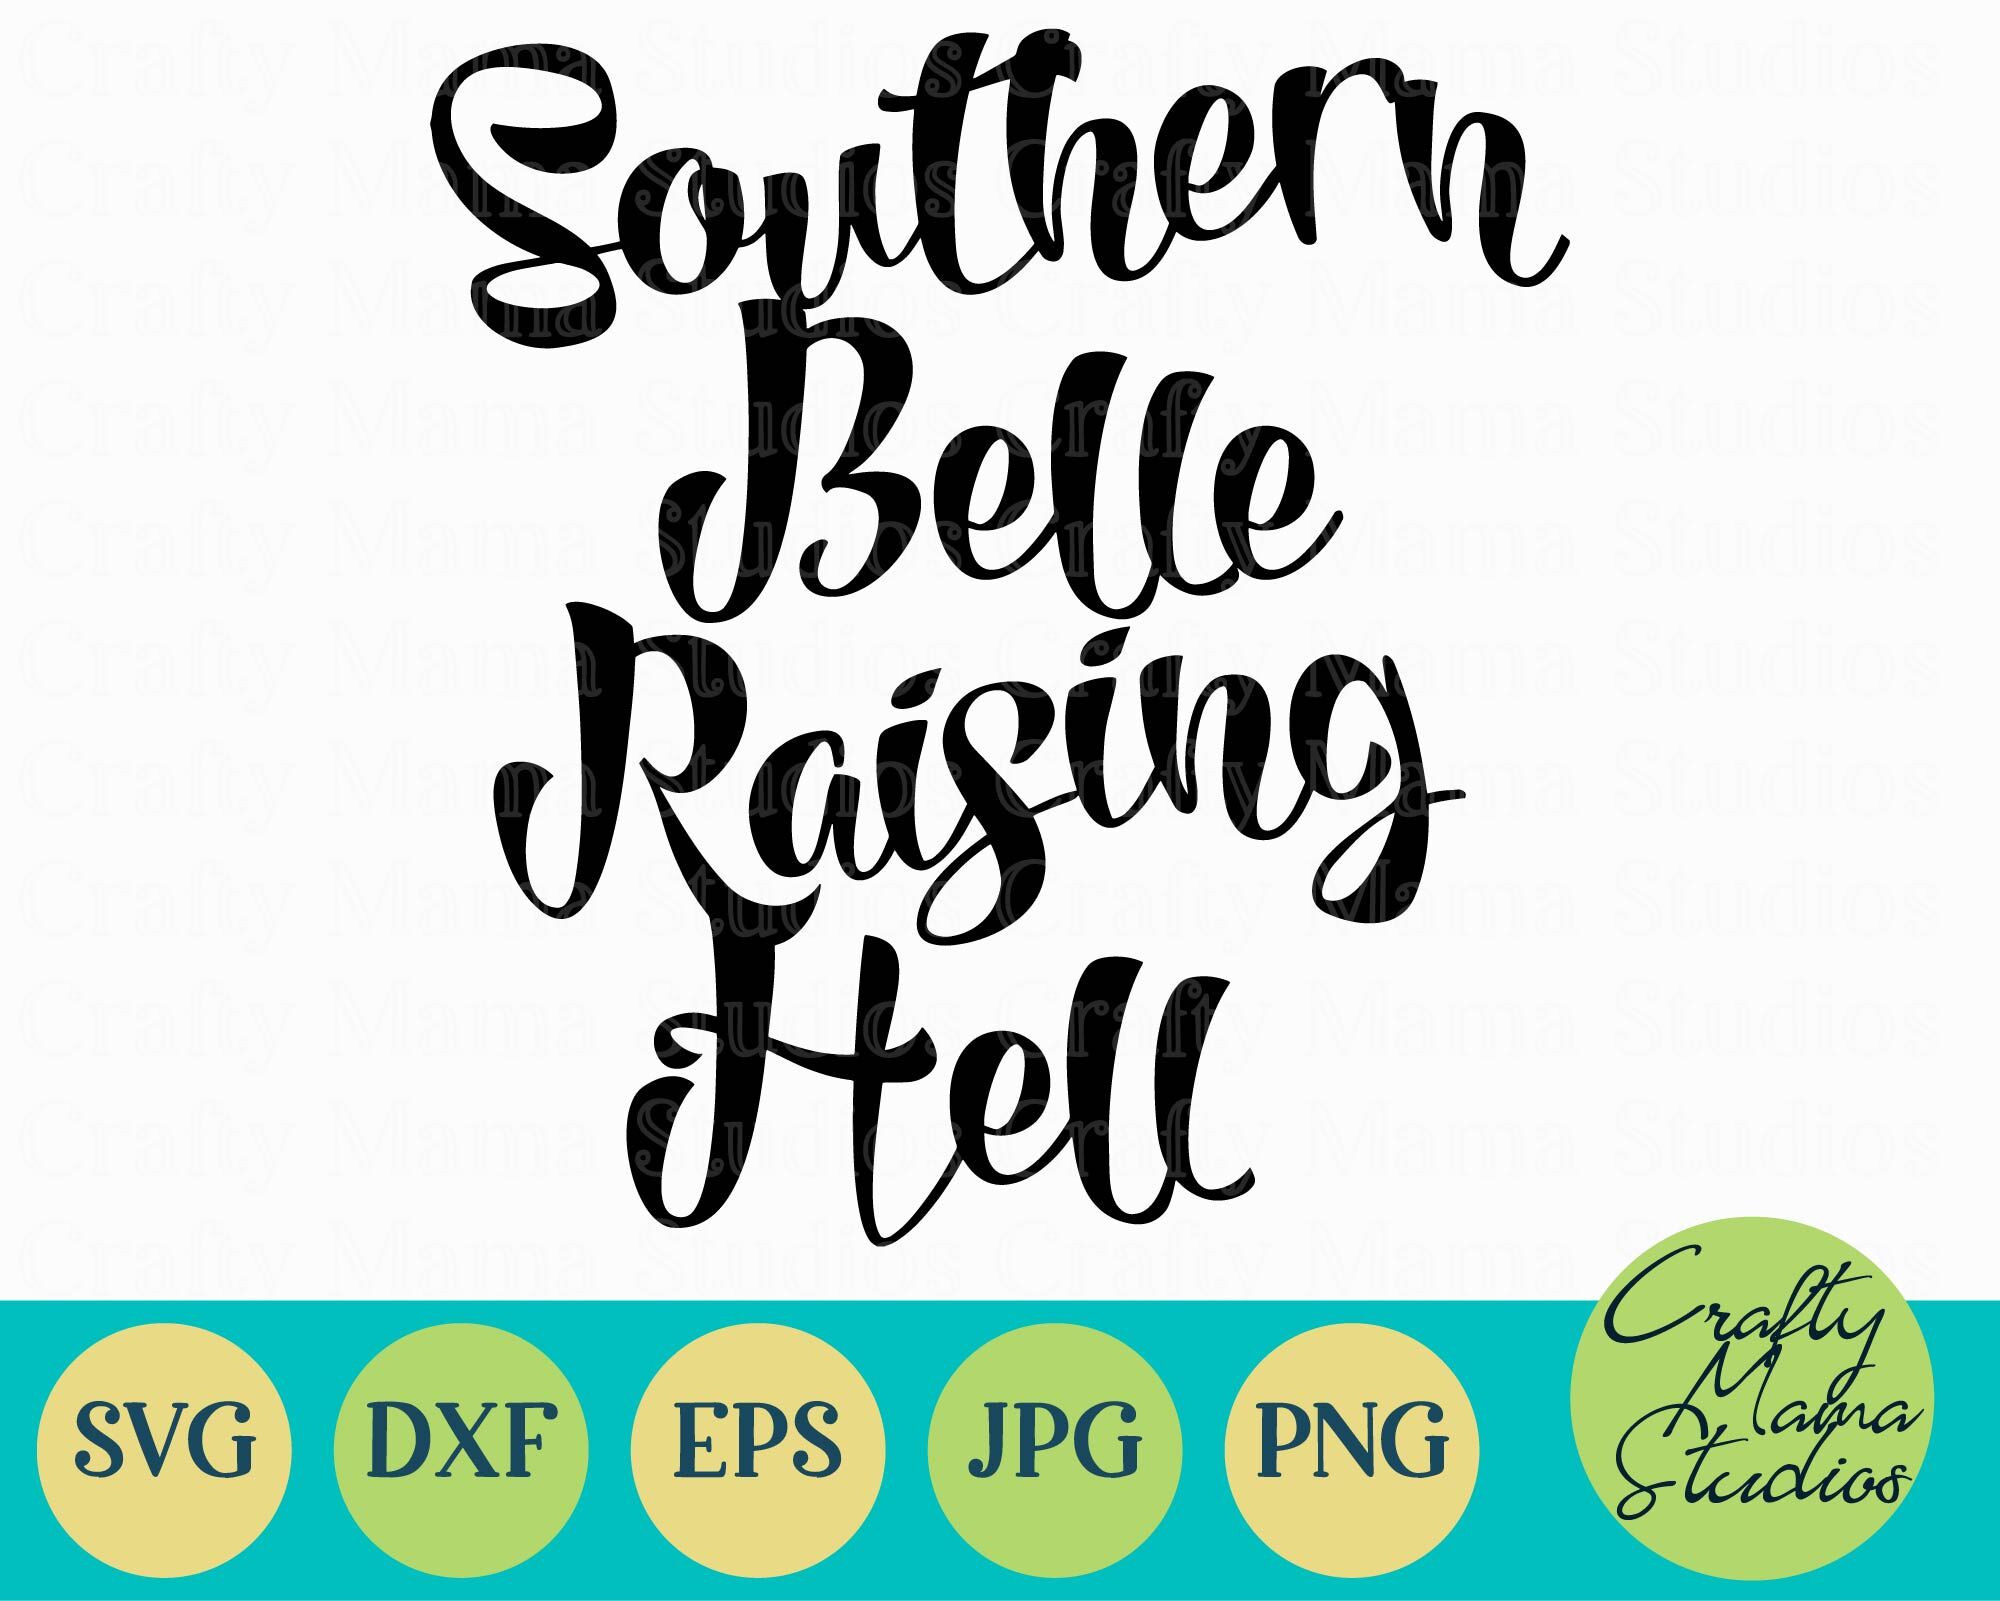 Southern Quotes And Sayings